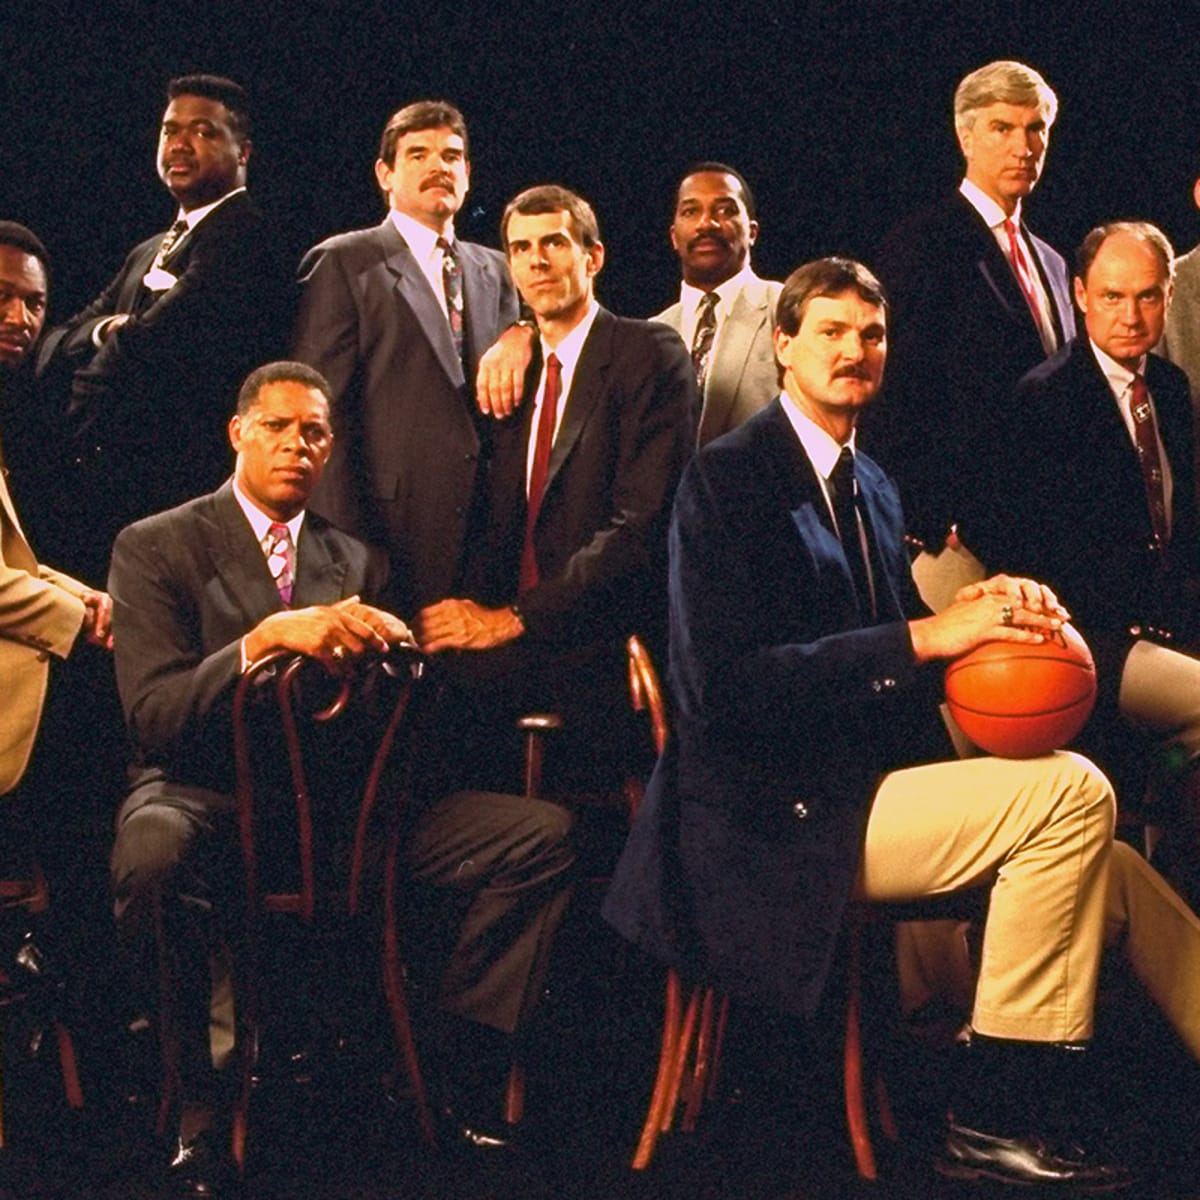 Starting Lineups 1992 Basket Ball Olympic Team Lineup 6 inch